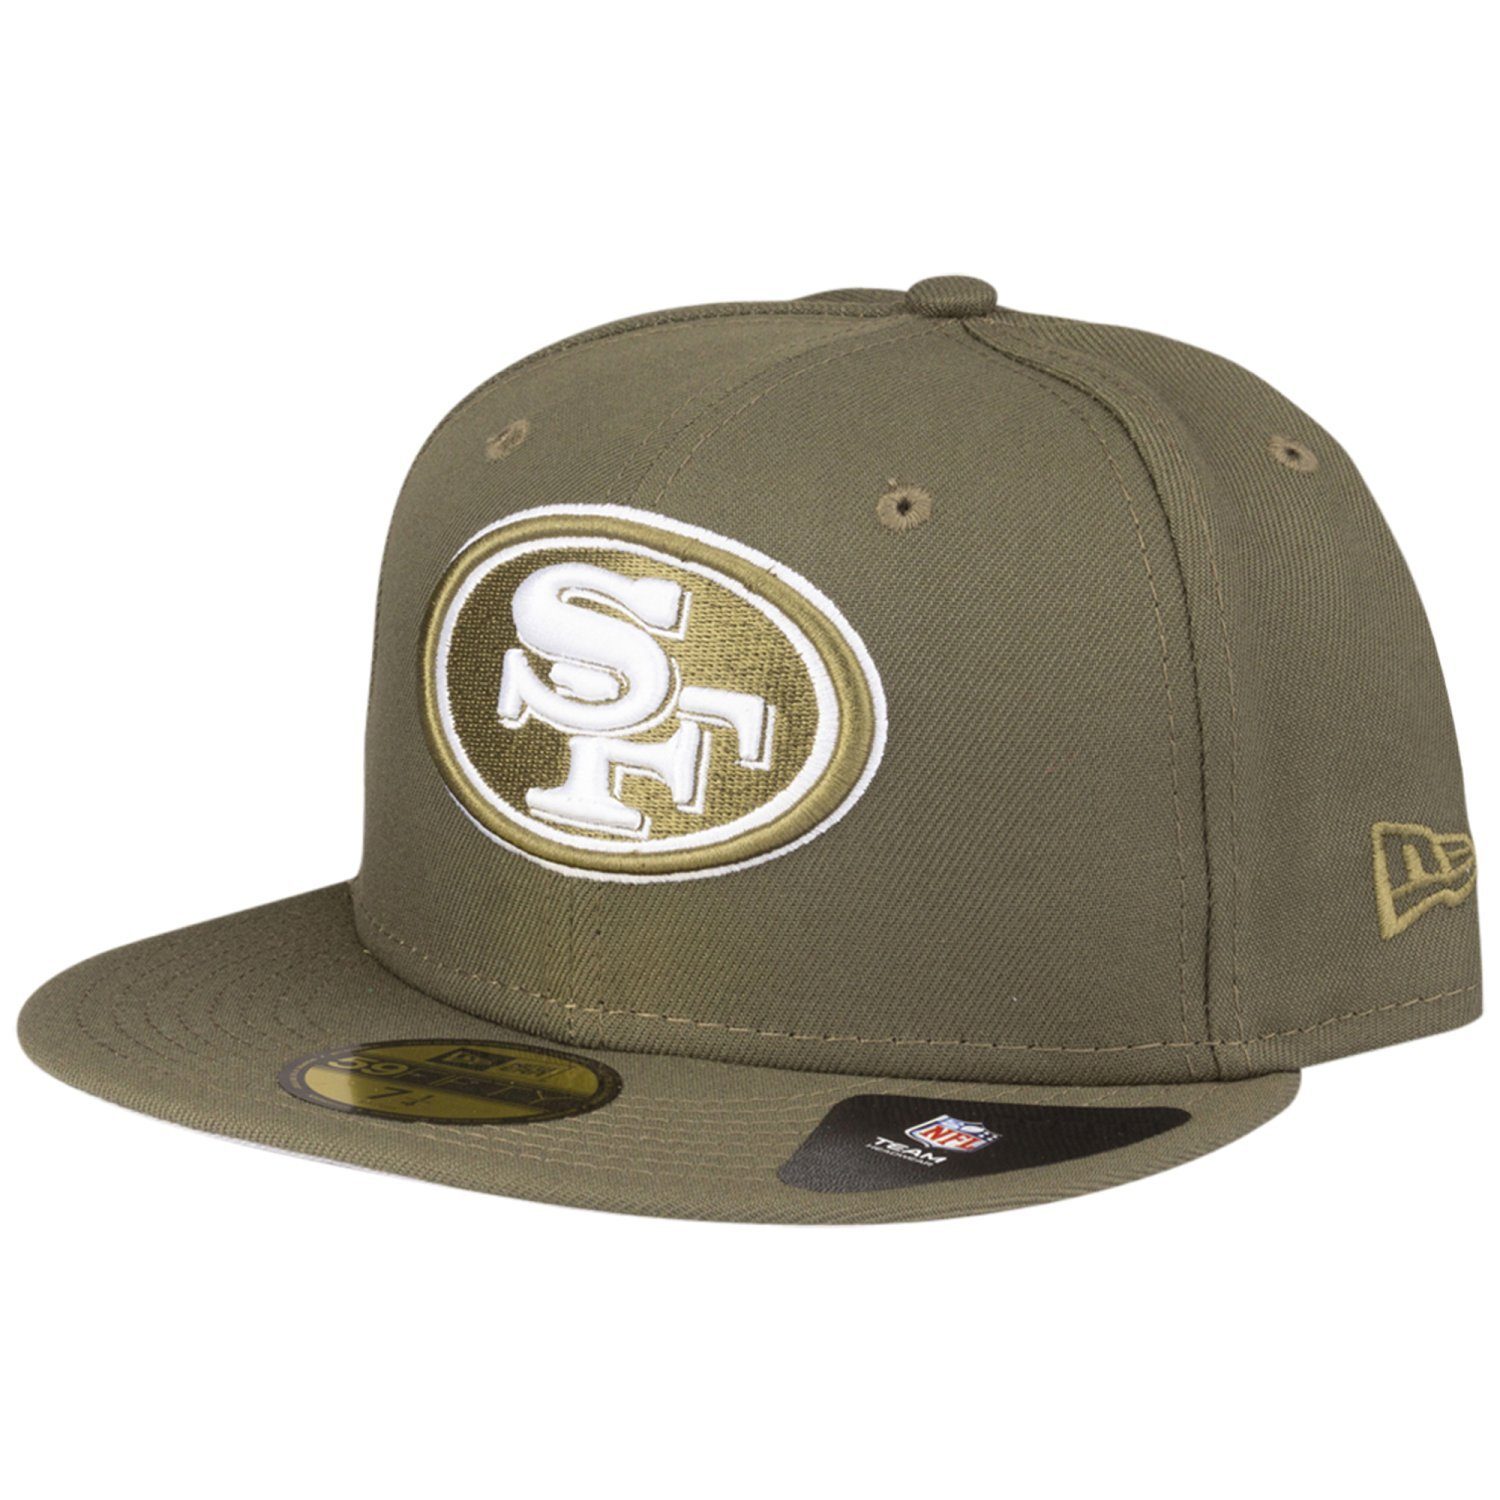 Era Francisco Fitted New San Cap 59Fifty 49ers